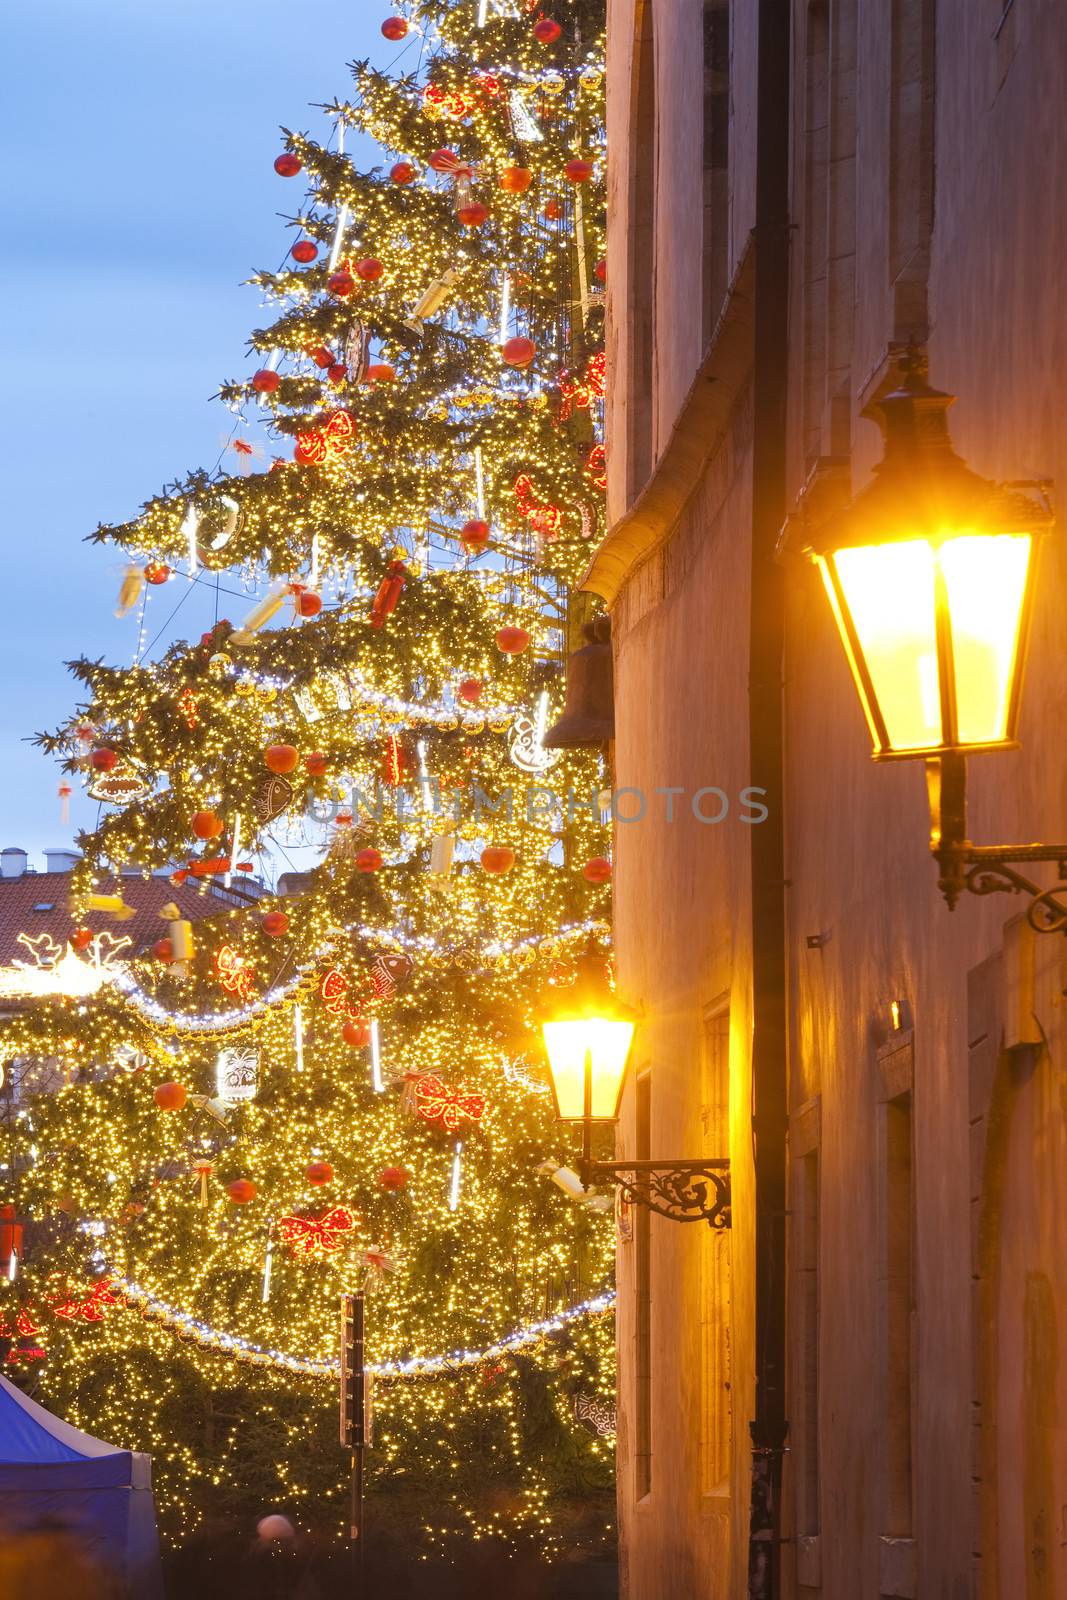 prague - view of christmas tree at the old town square from medieval alley